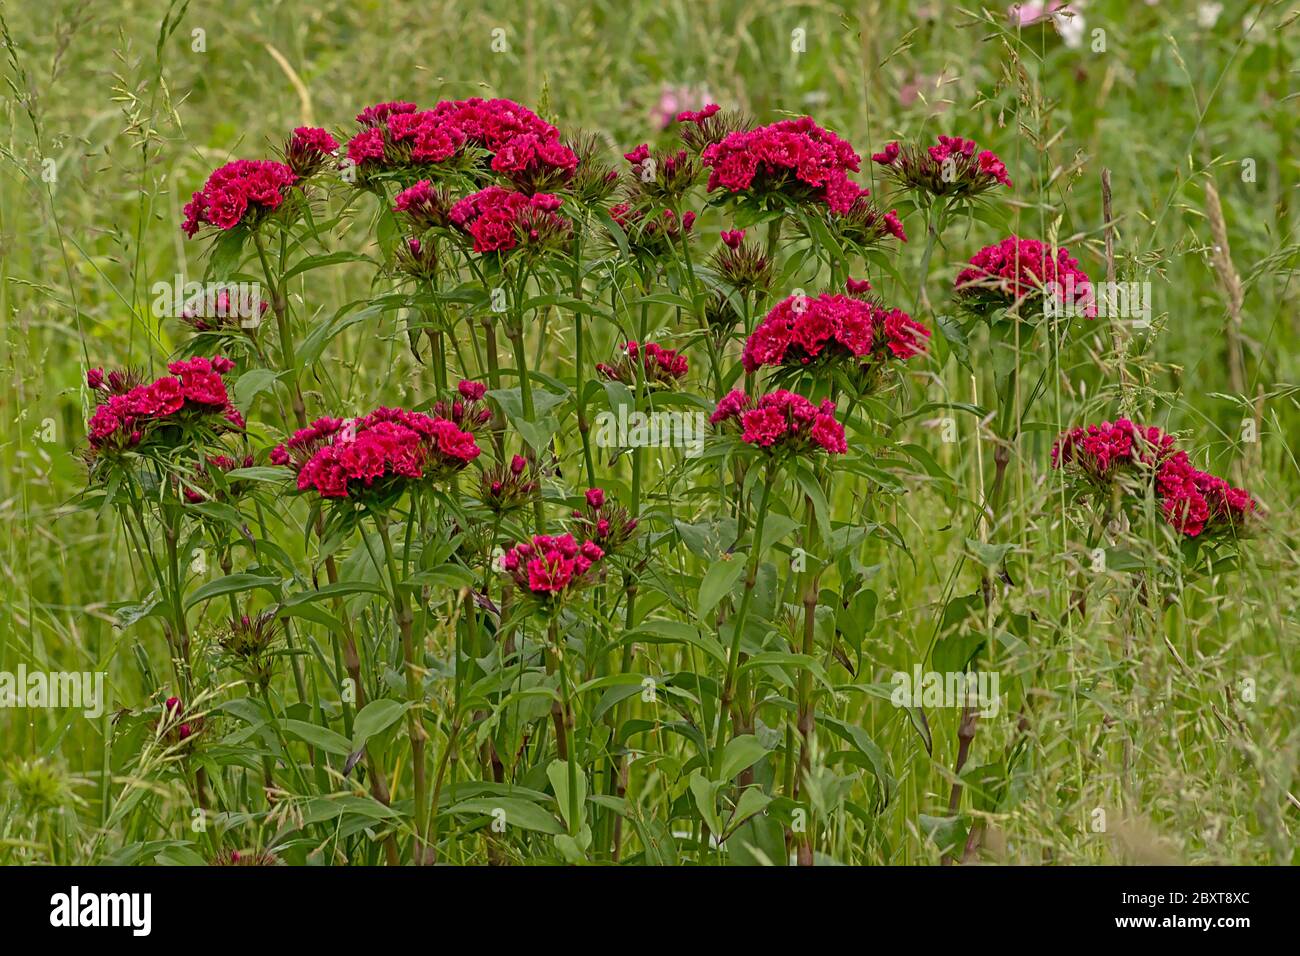 Plumed cockscomb flowers in a wild garden with high grass. Stock Photo